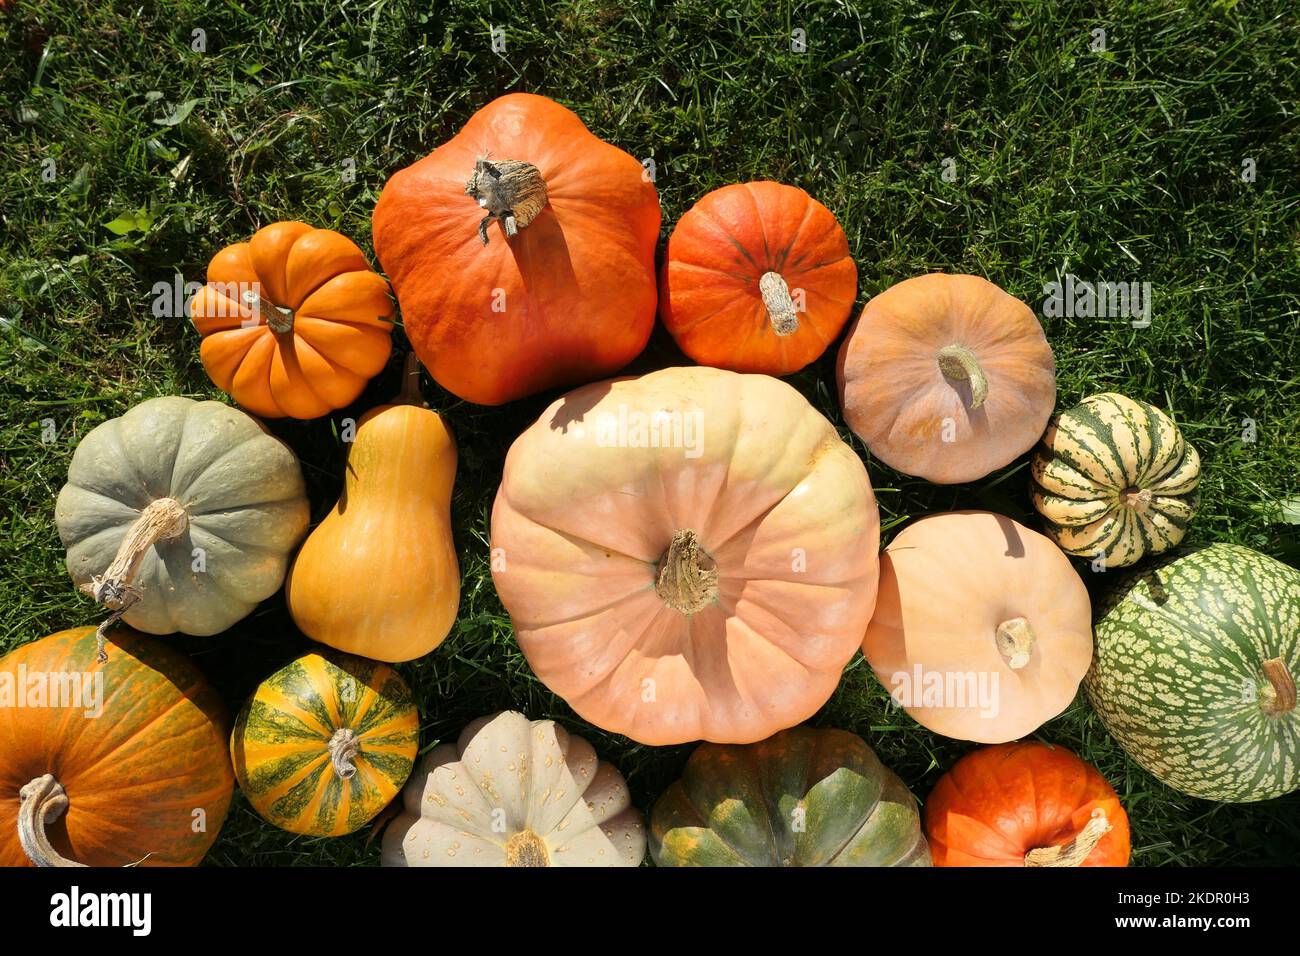 Pumpkins and squashes varieties on the grass. Colorful pumpkins background. Stock Photo